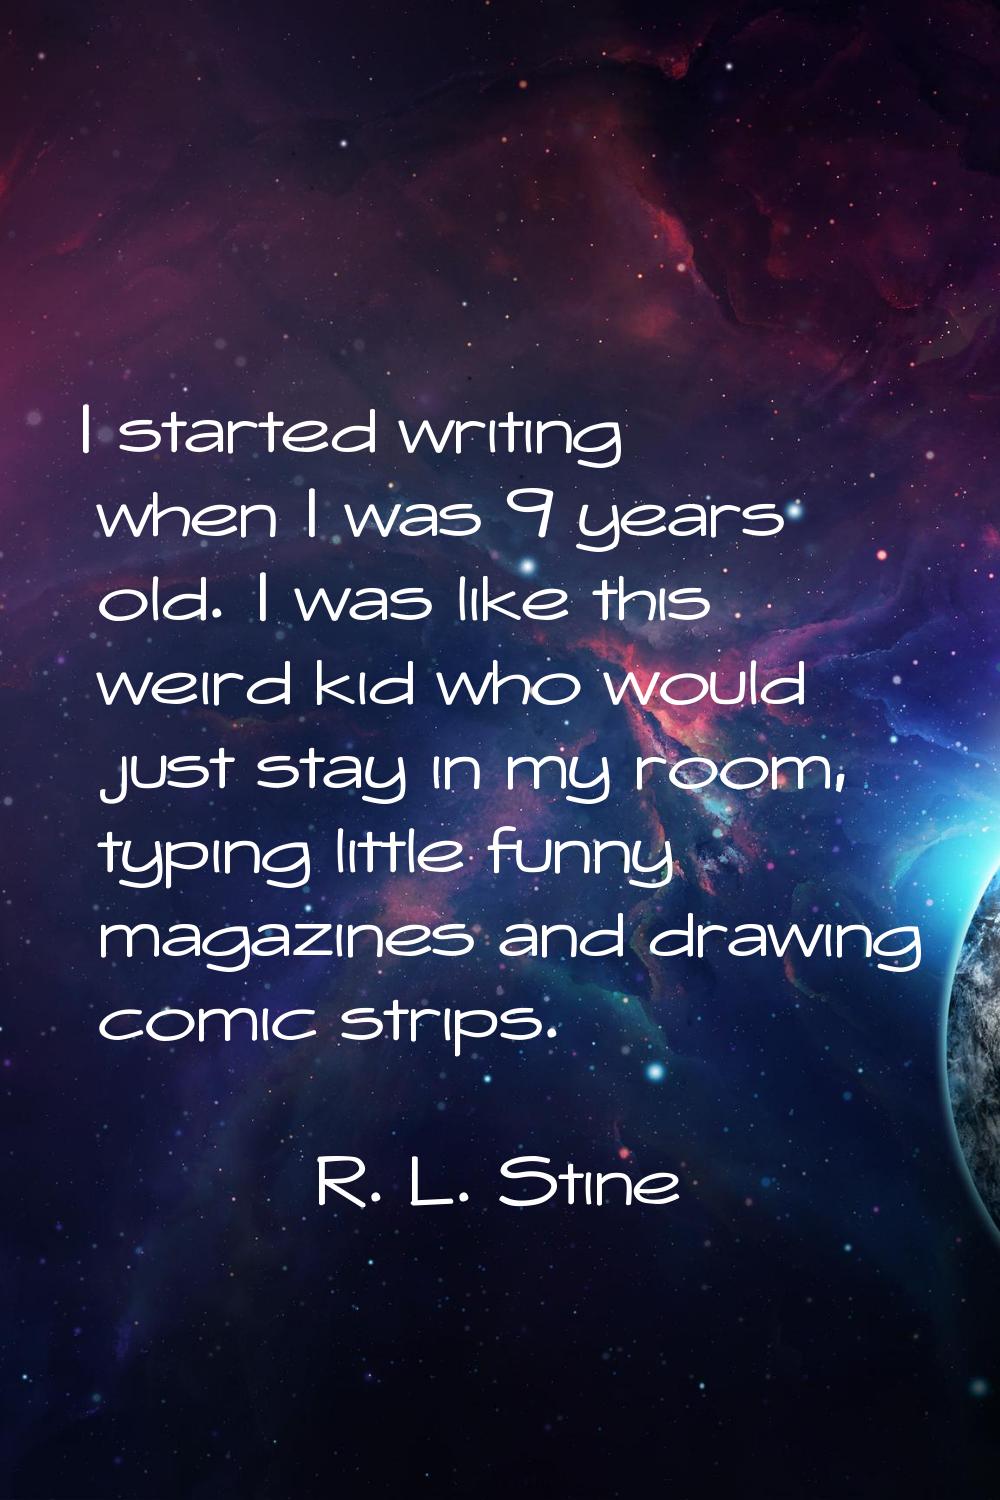 I started writing when I was 9 years old. I was like this weird kid who would just stay in my room,